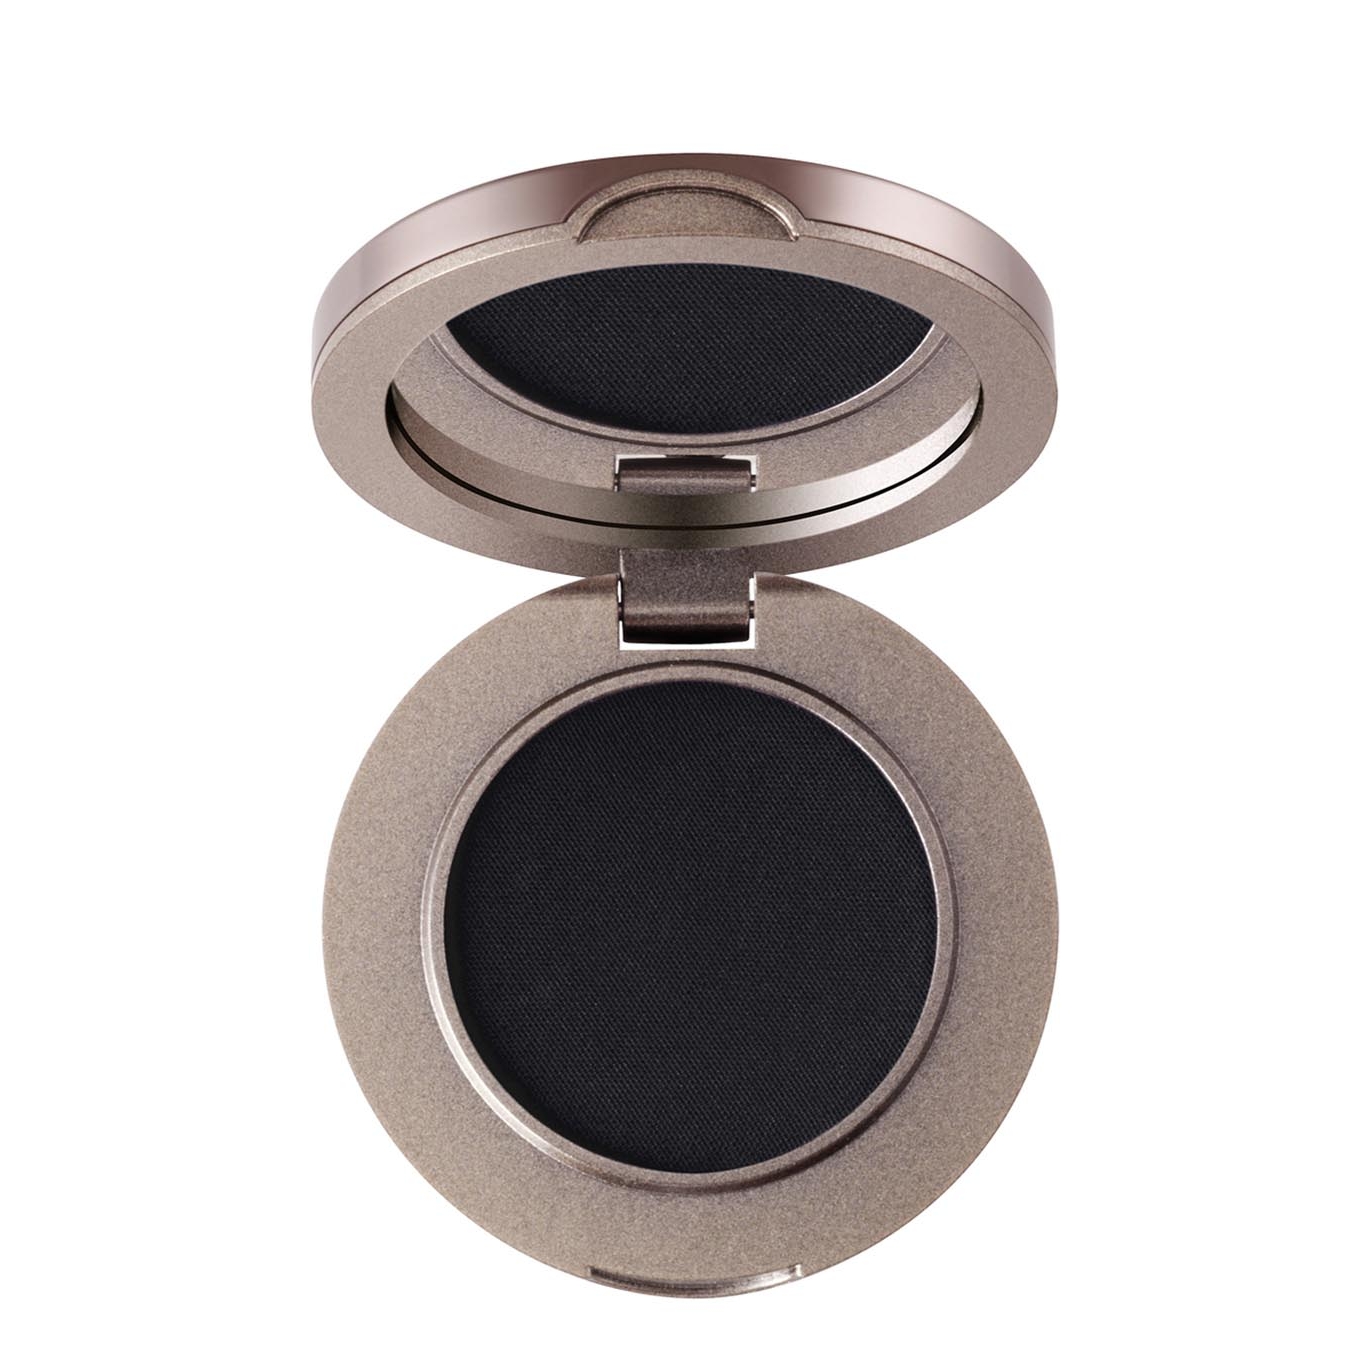 Delilah Colour Intense Compact Eyeshadow In White